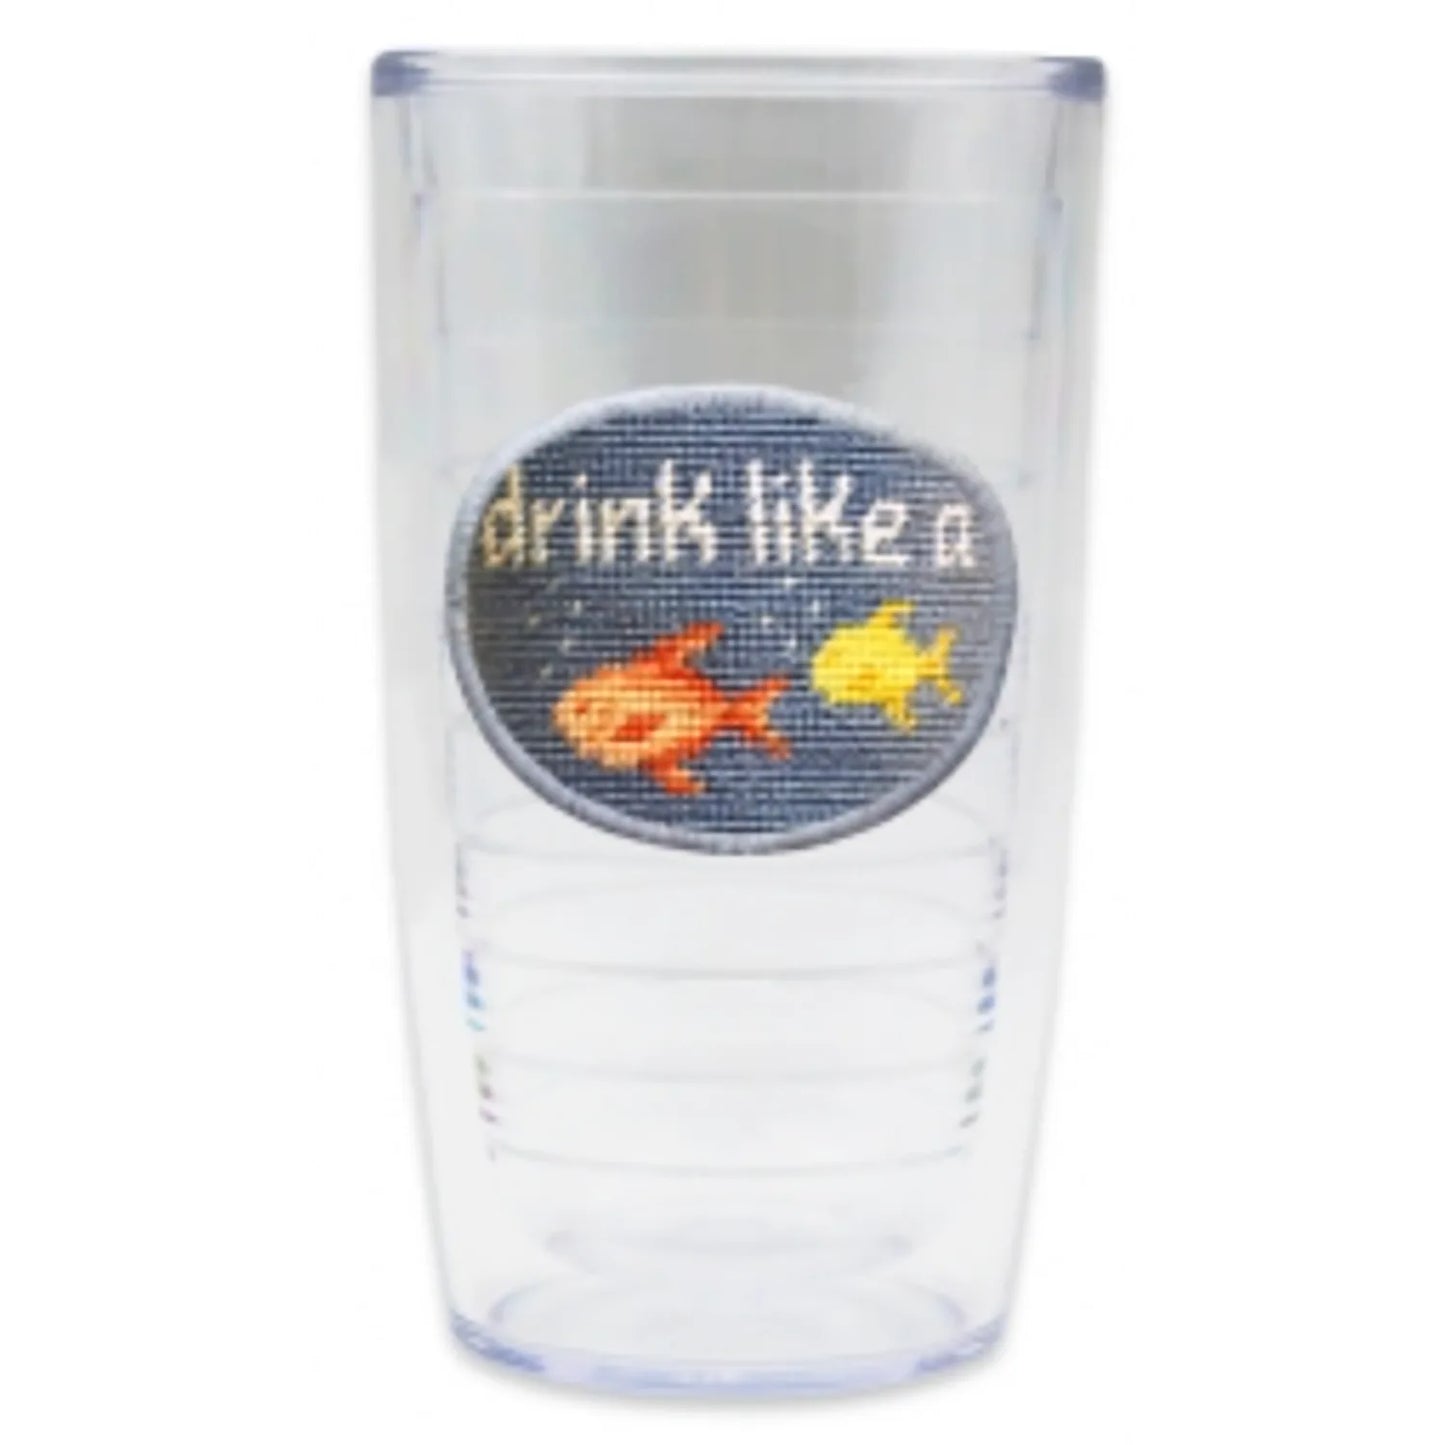 Smathers & Branson Tervis Tumblers